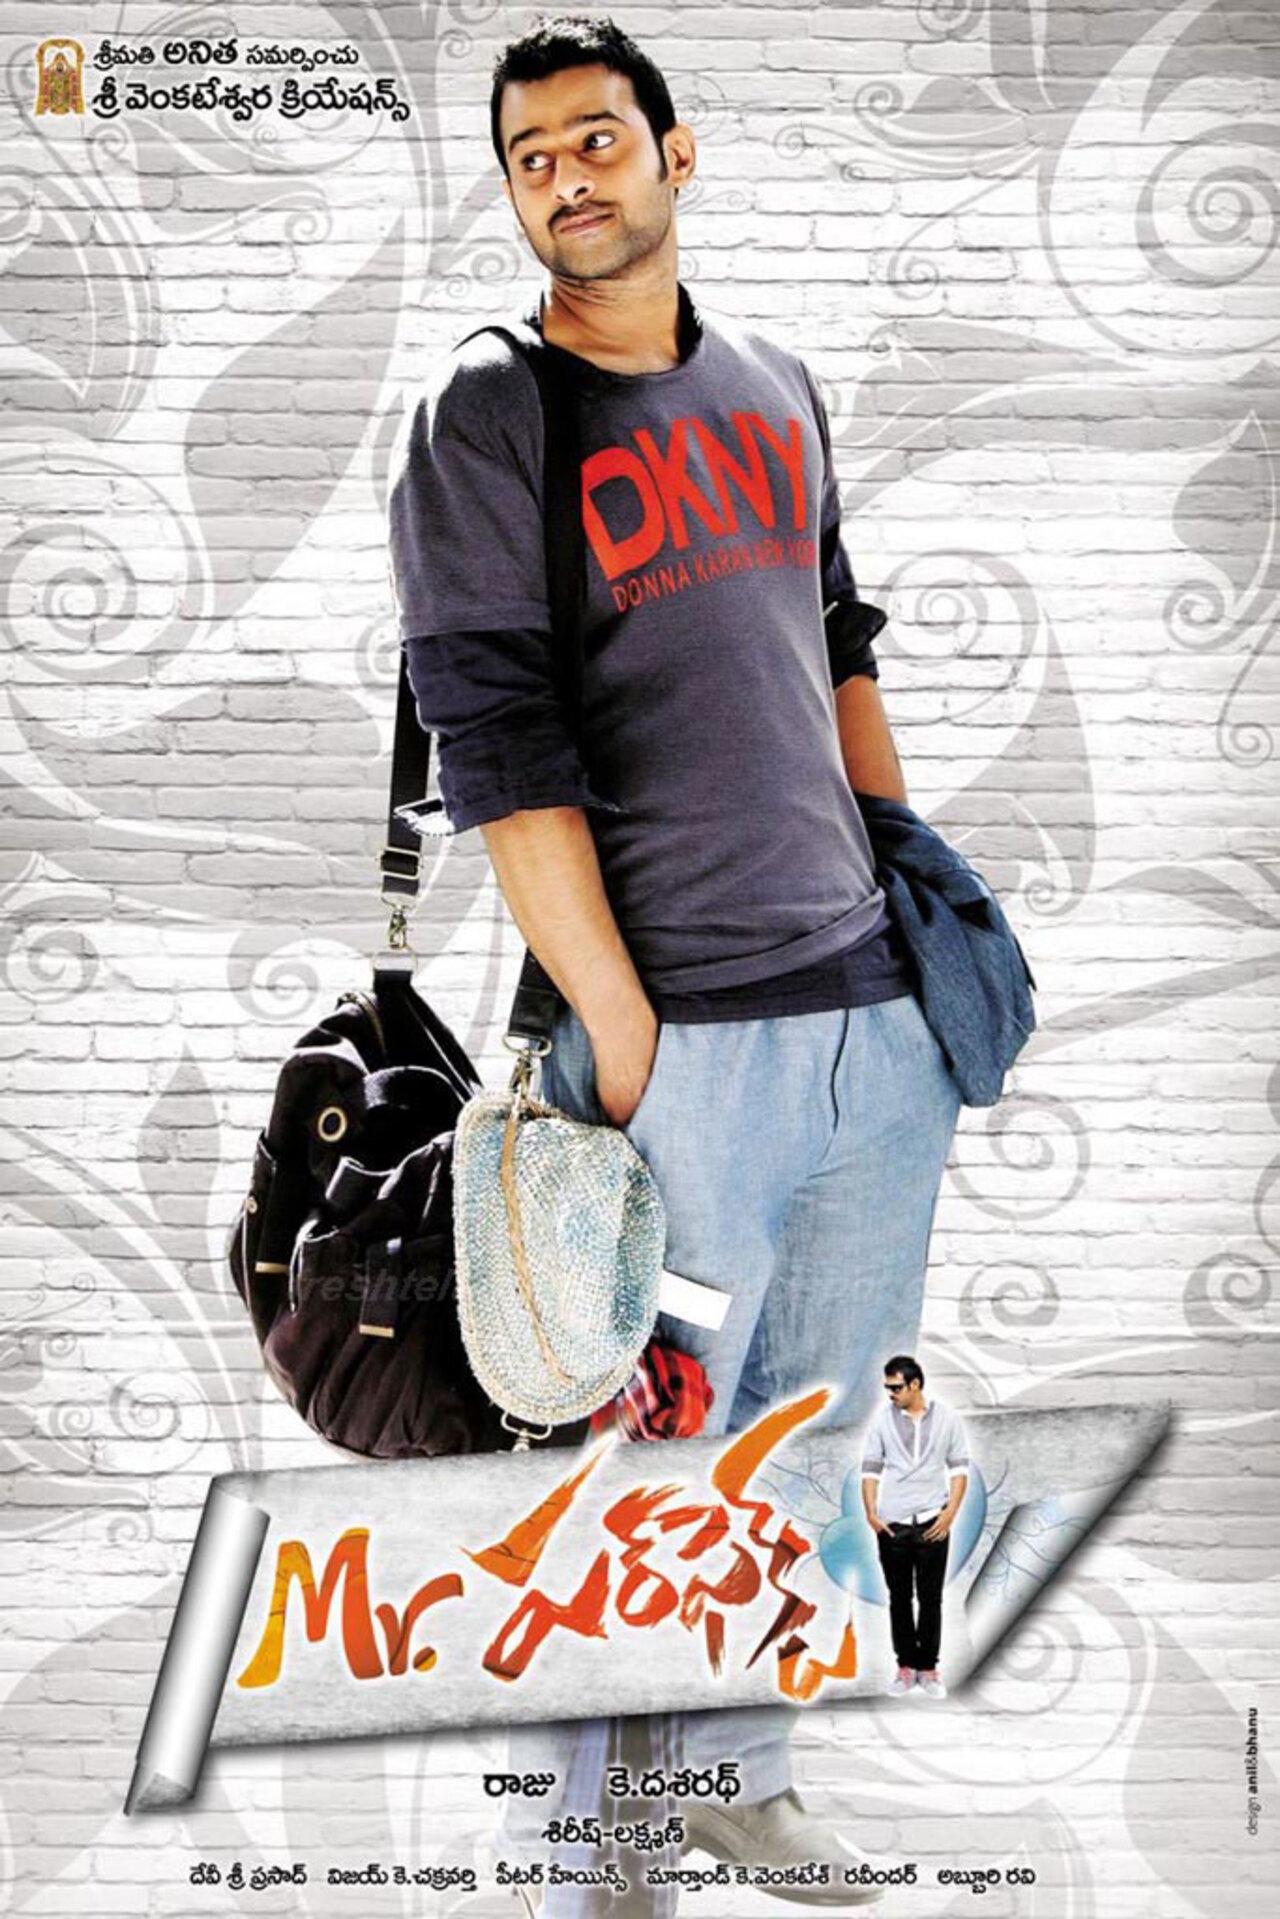 This 2011 film 'Mr Perfect' further strengthed his star status in the Telugu film industry. The romantic comedy film directed by Dasaradh also stars Prabhas, Kajal Agarwal and Taapsee Pannu